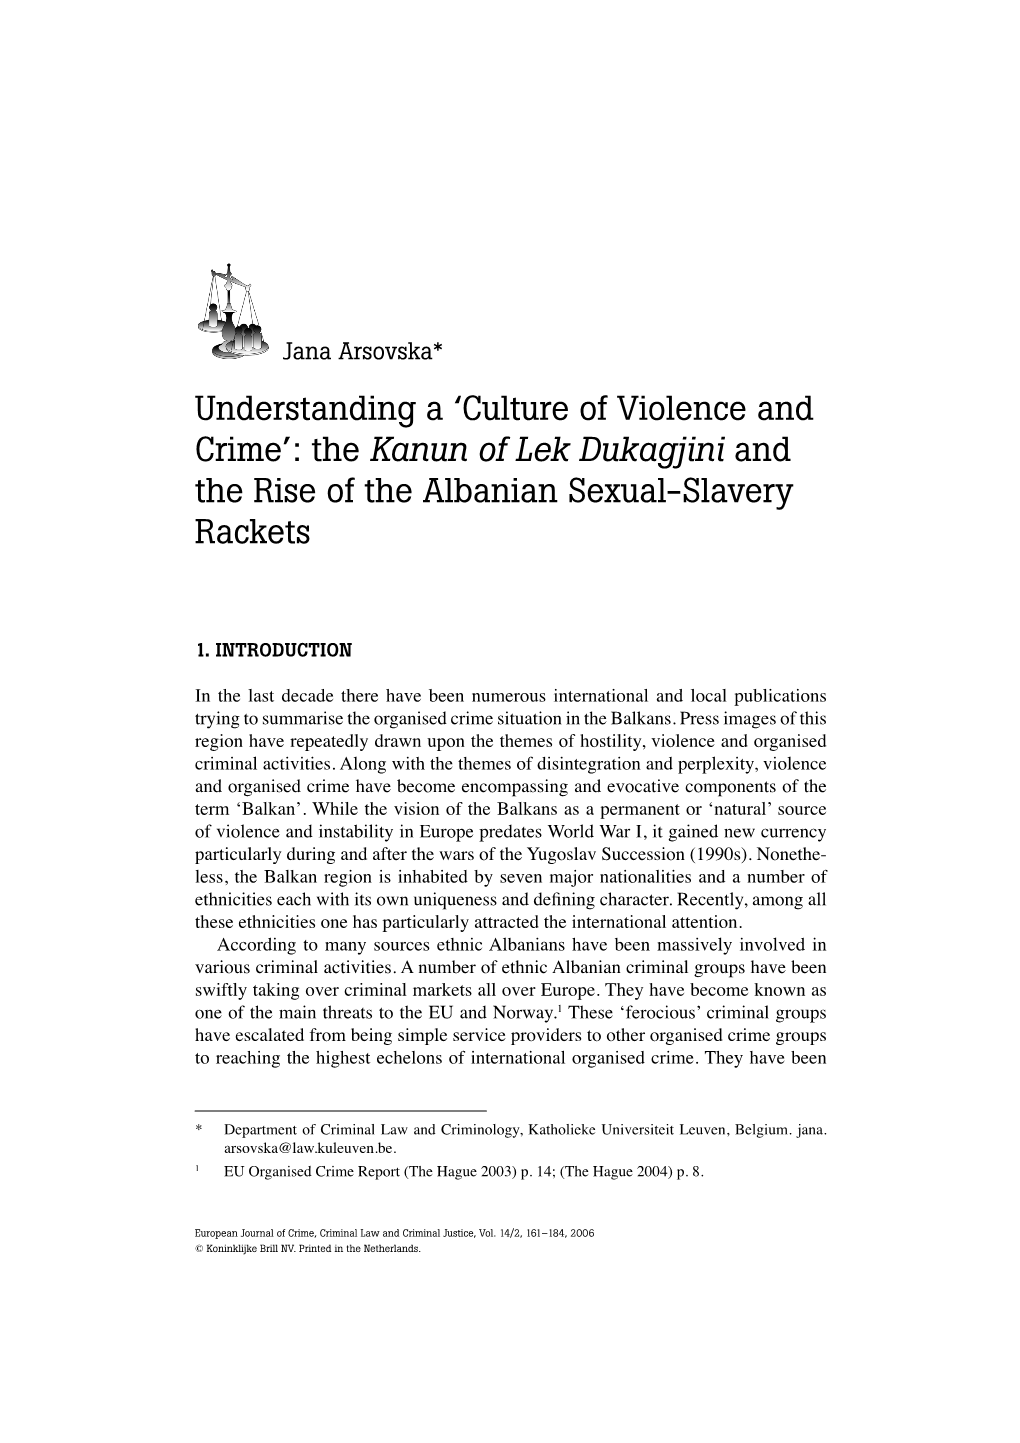 'Culture of Violence and Crime': the Kanun of Lek Dukagjini and The